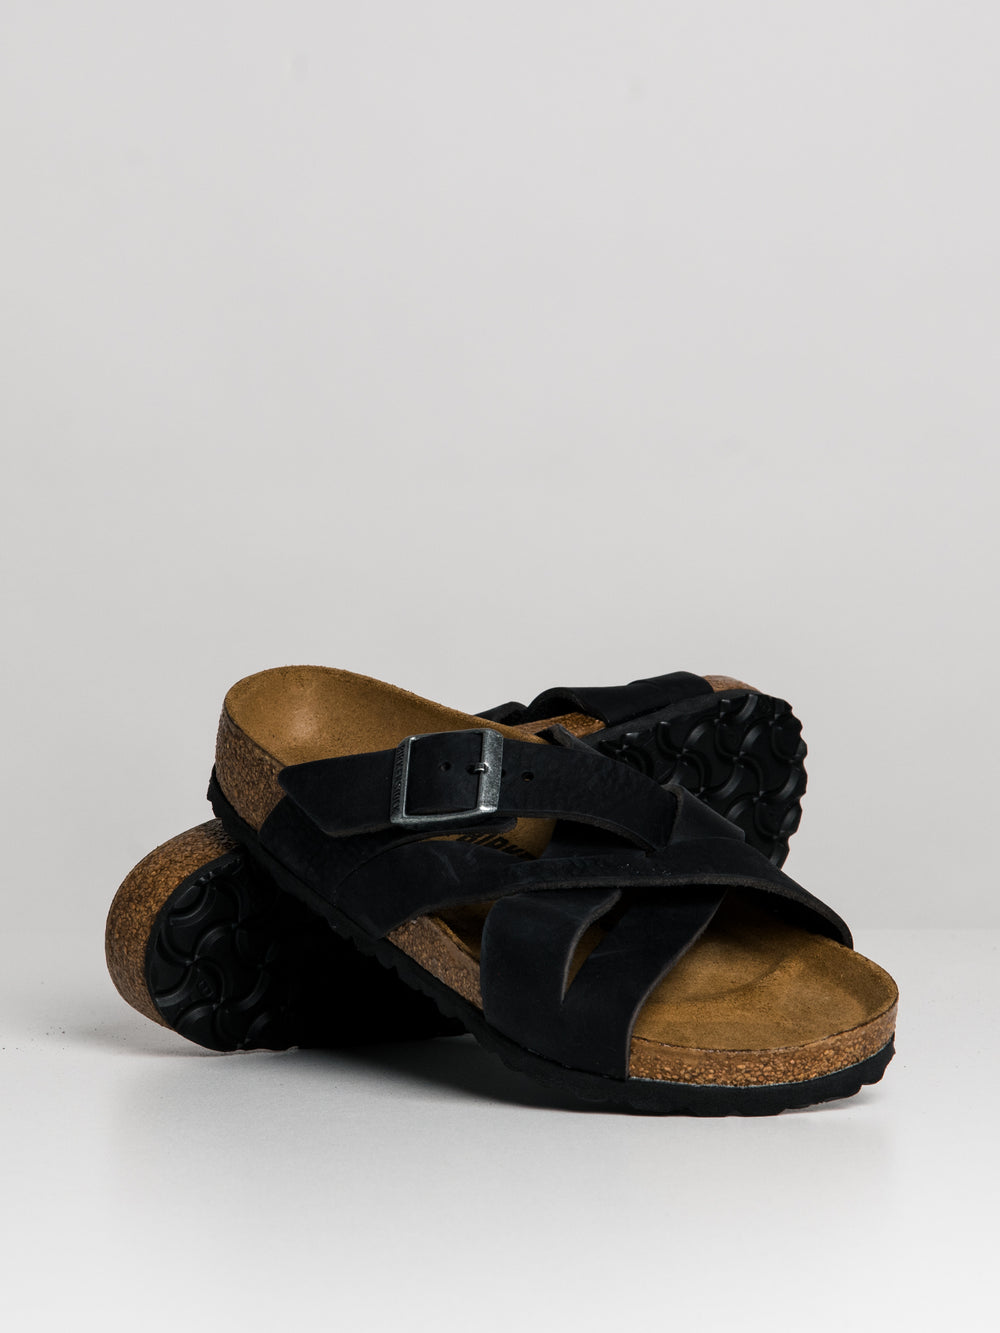 WOMENS BIRKENSTOCK LUGANO OILED LEATHER REGULAR SANDALS - CLEARANCE